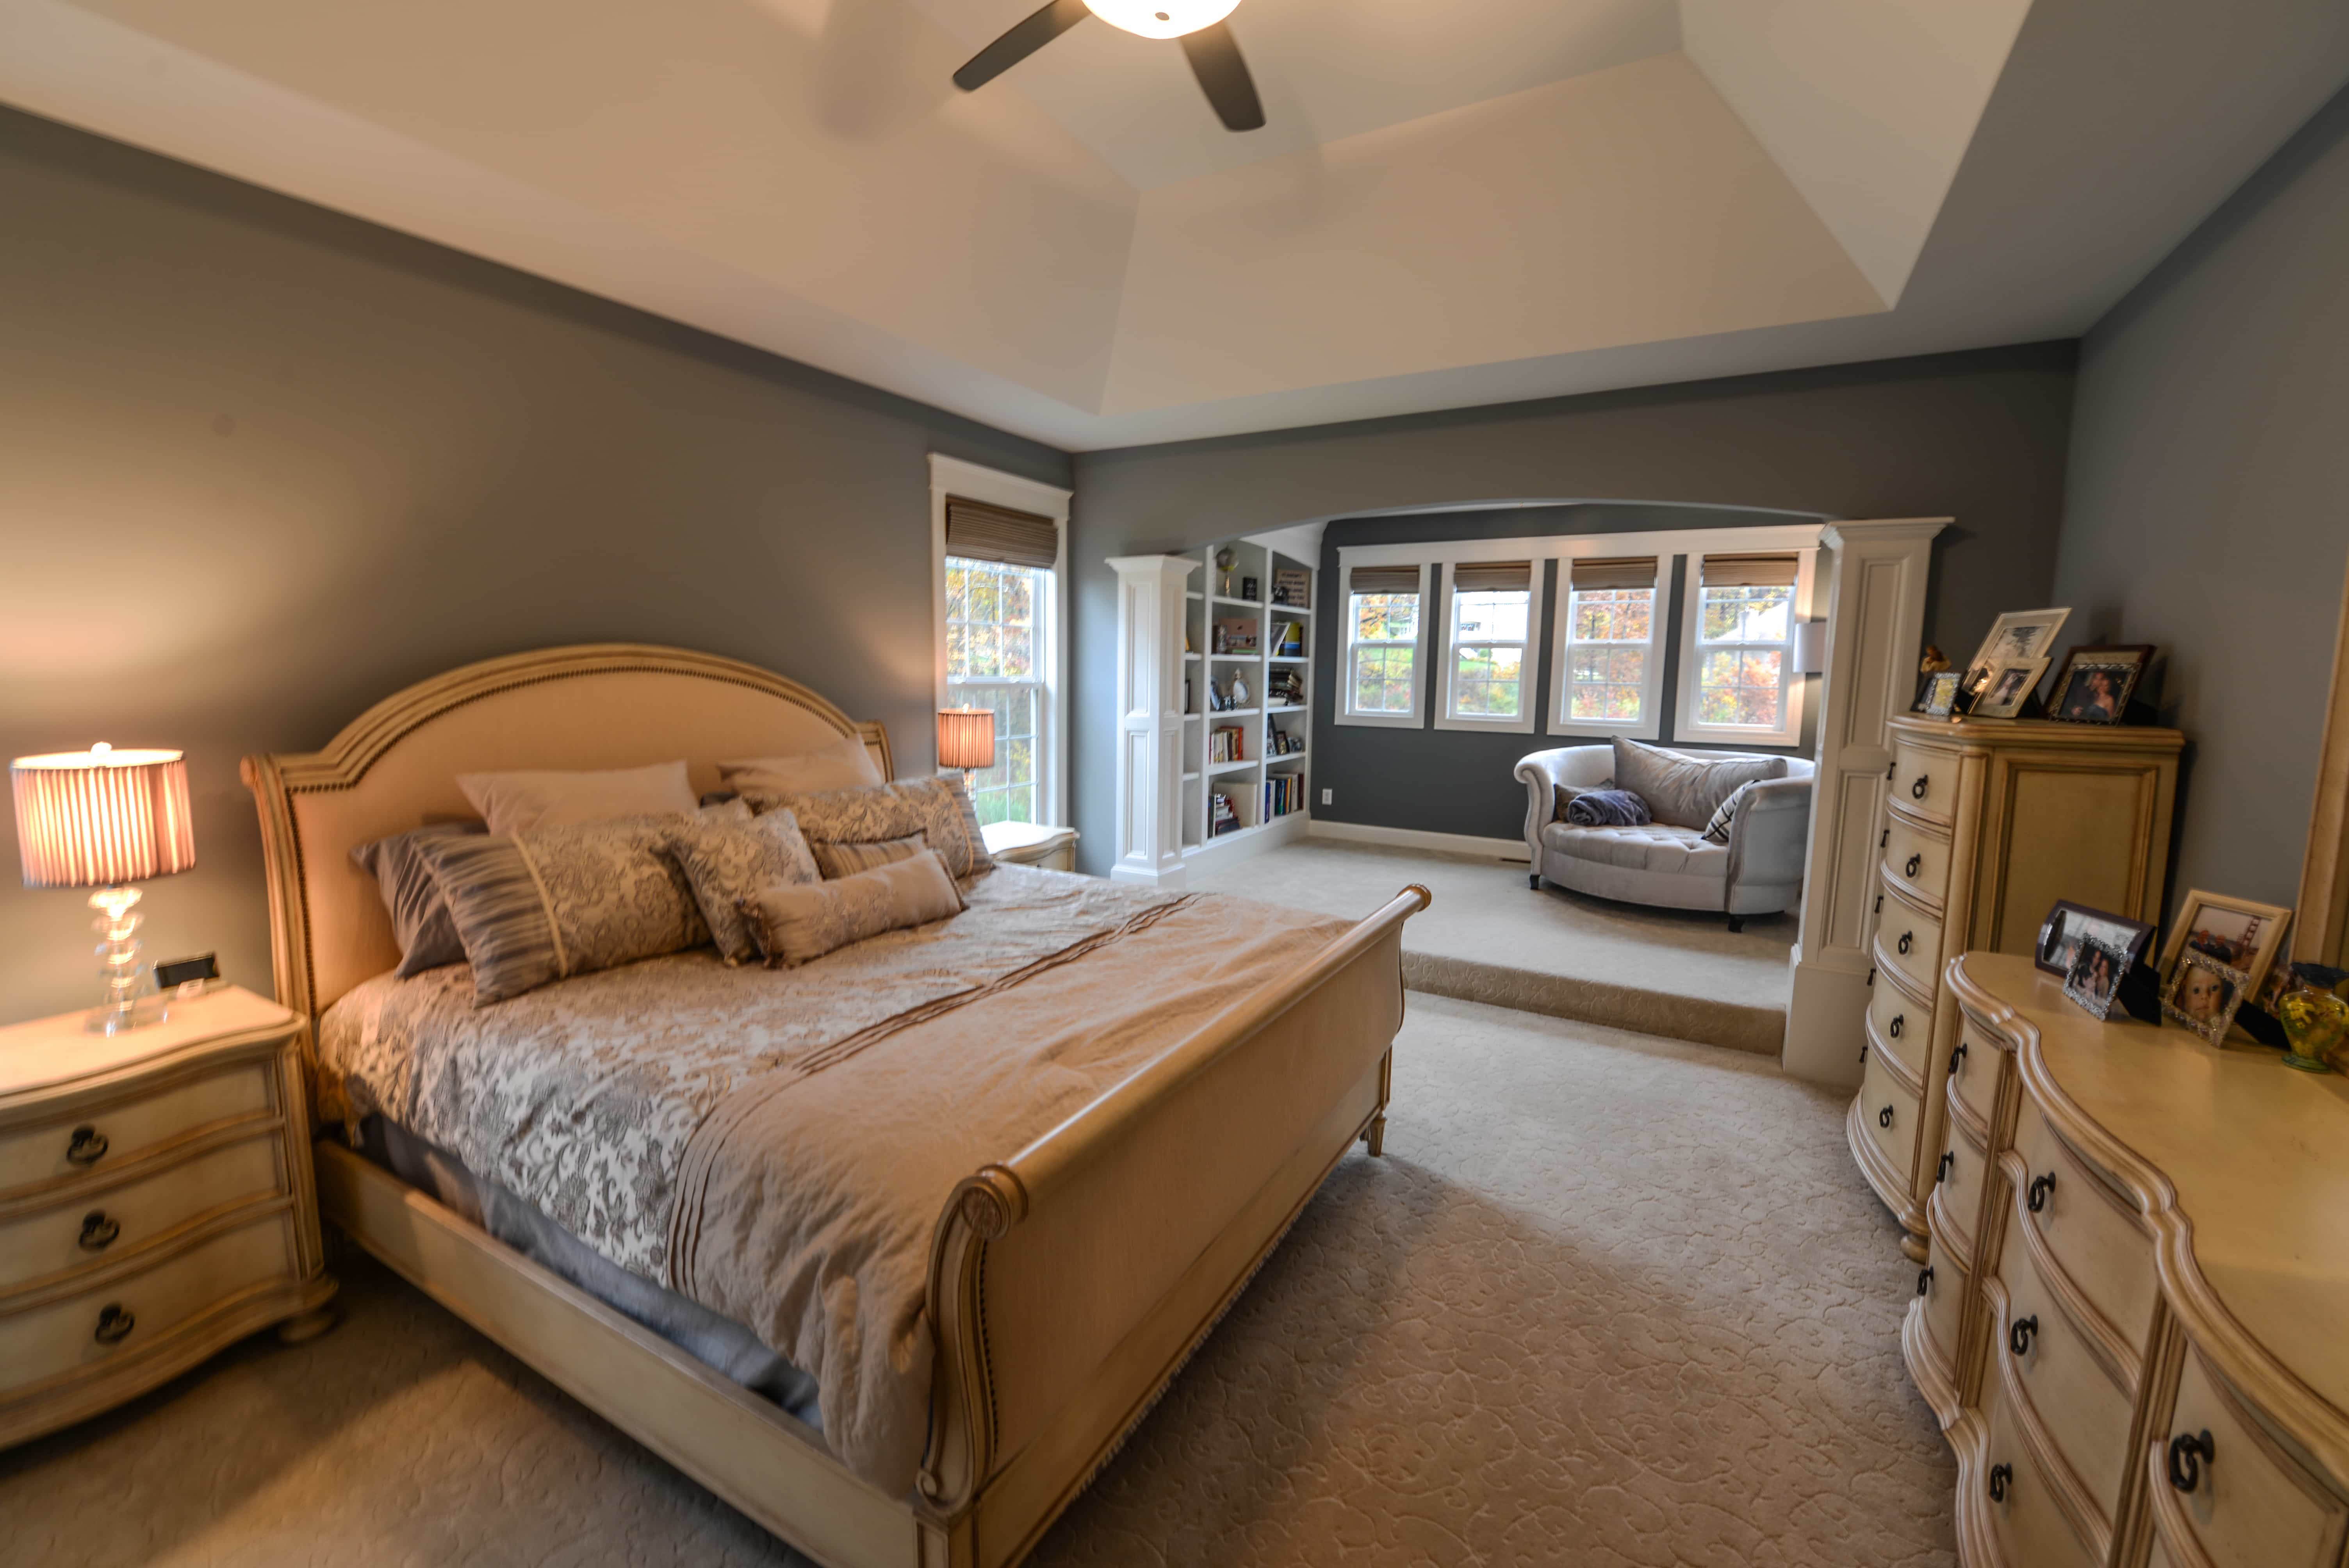 Build Your Perfect Master Bedroom Suite | Steiner Homes